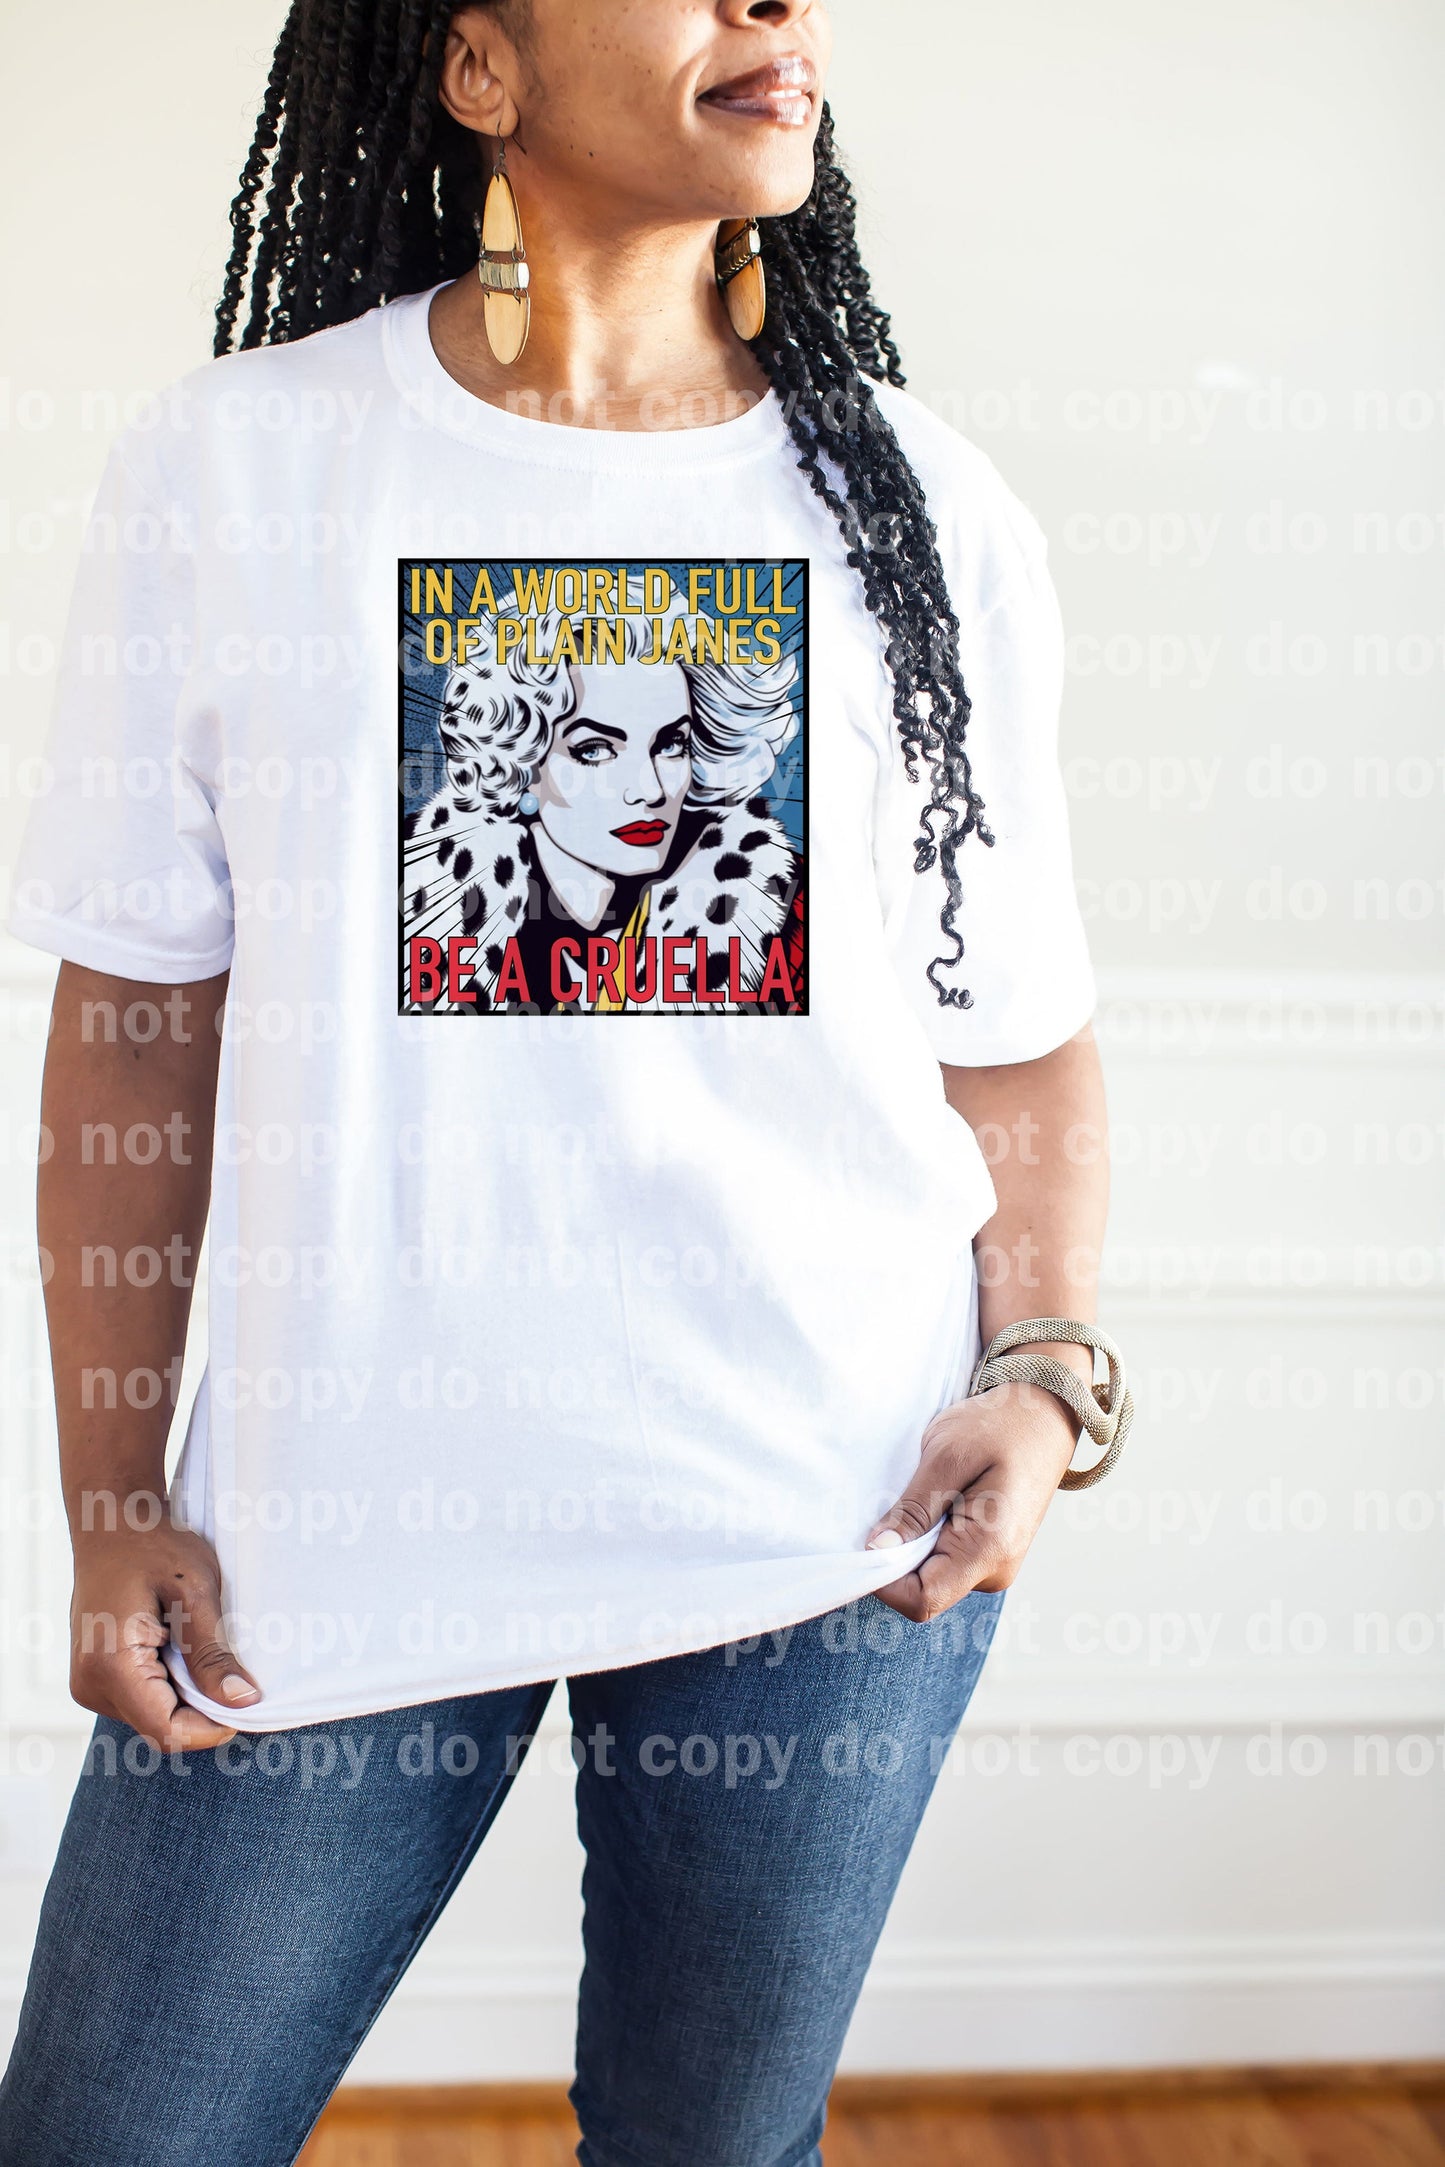 In A World Full Of Plain Janes Be A Cruella Dream Print or Sublimation Print